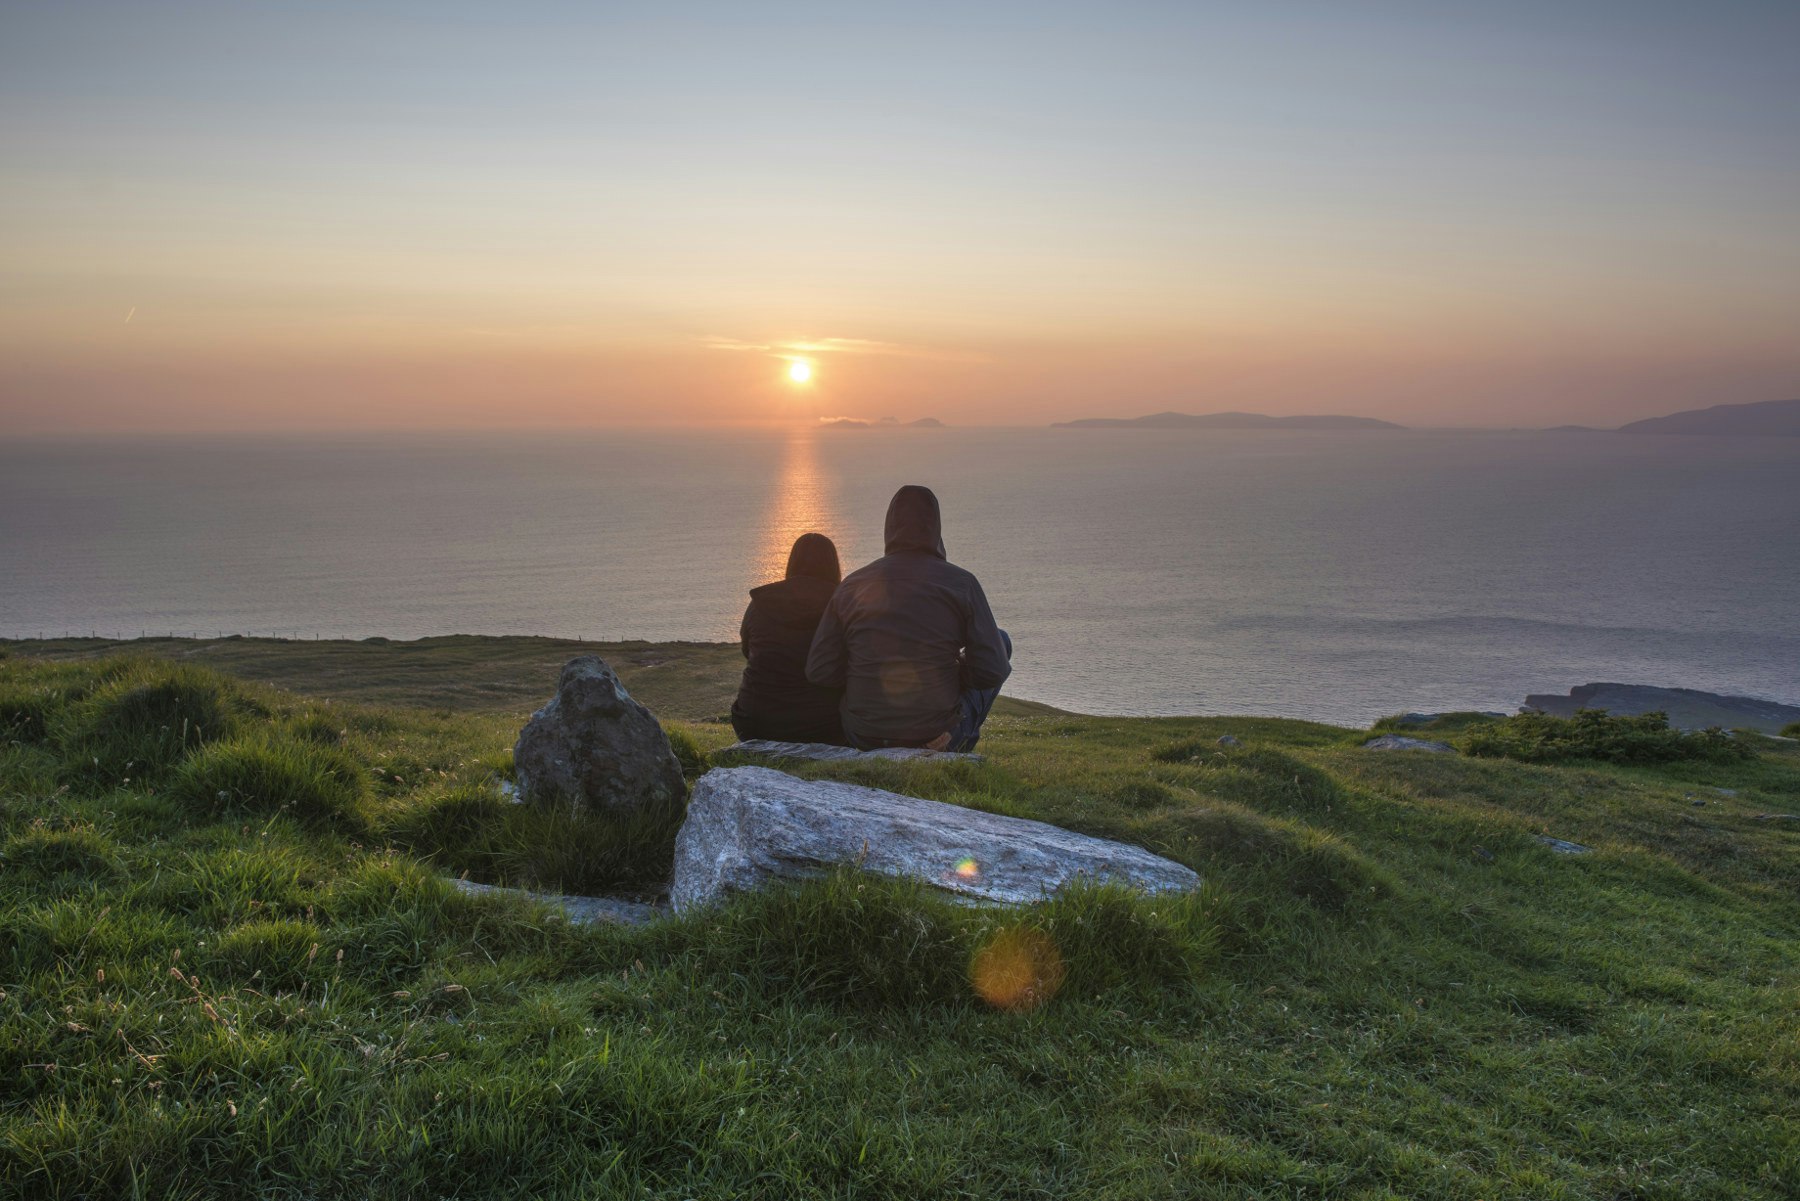 A couple sitting on a boulder on a hill watching the setting sun over the ocean